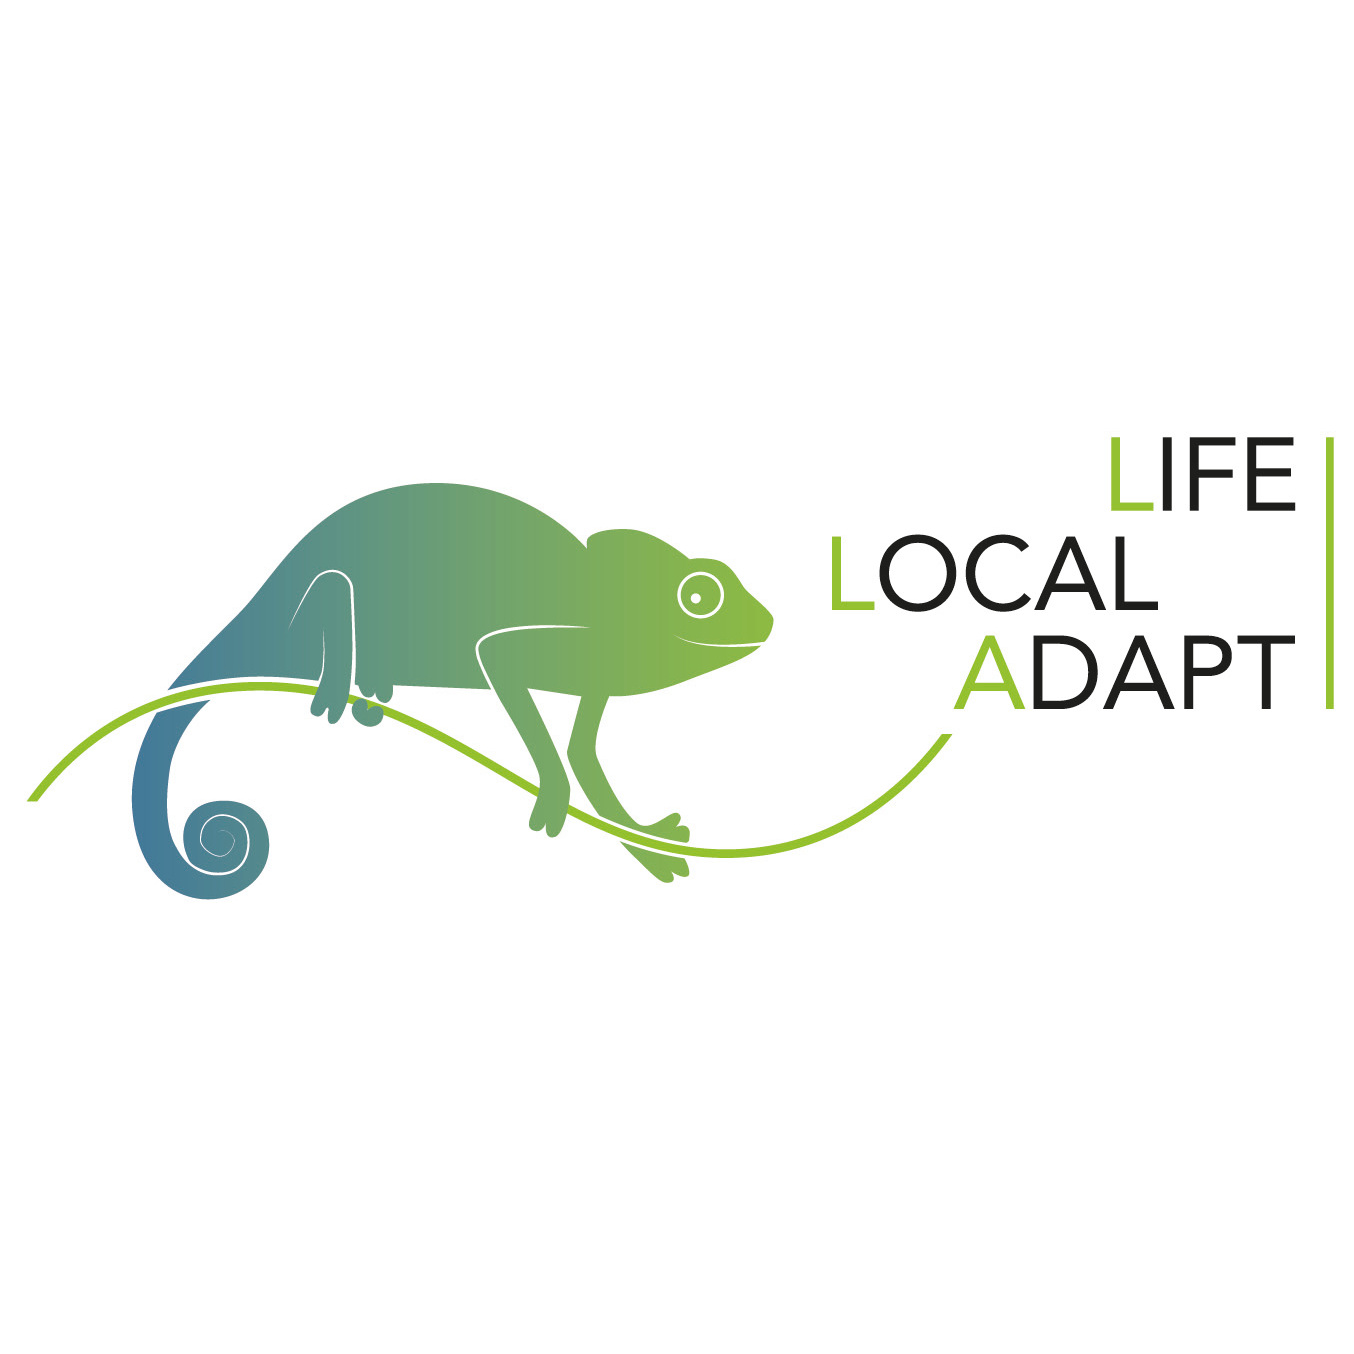 LIFE LOCAL ADAPT - Integration of climate change adaptation into the work of local authorities